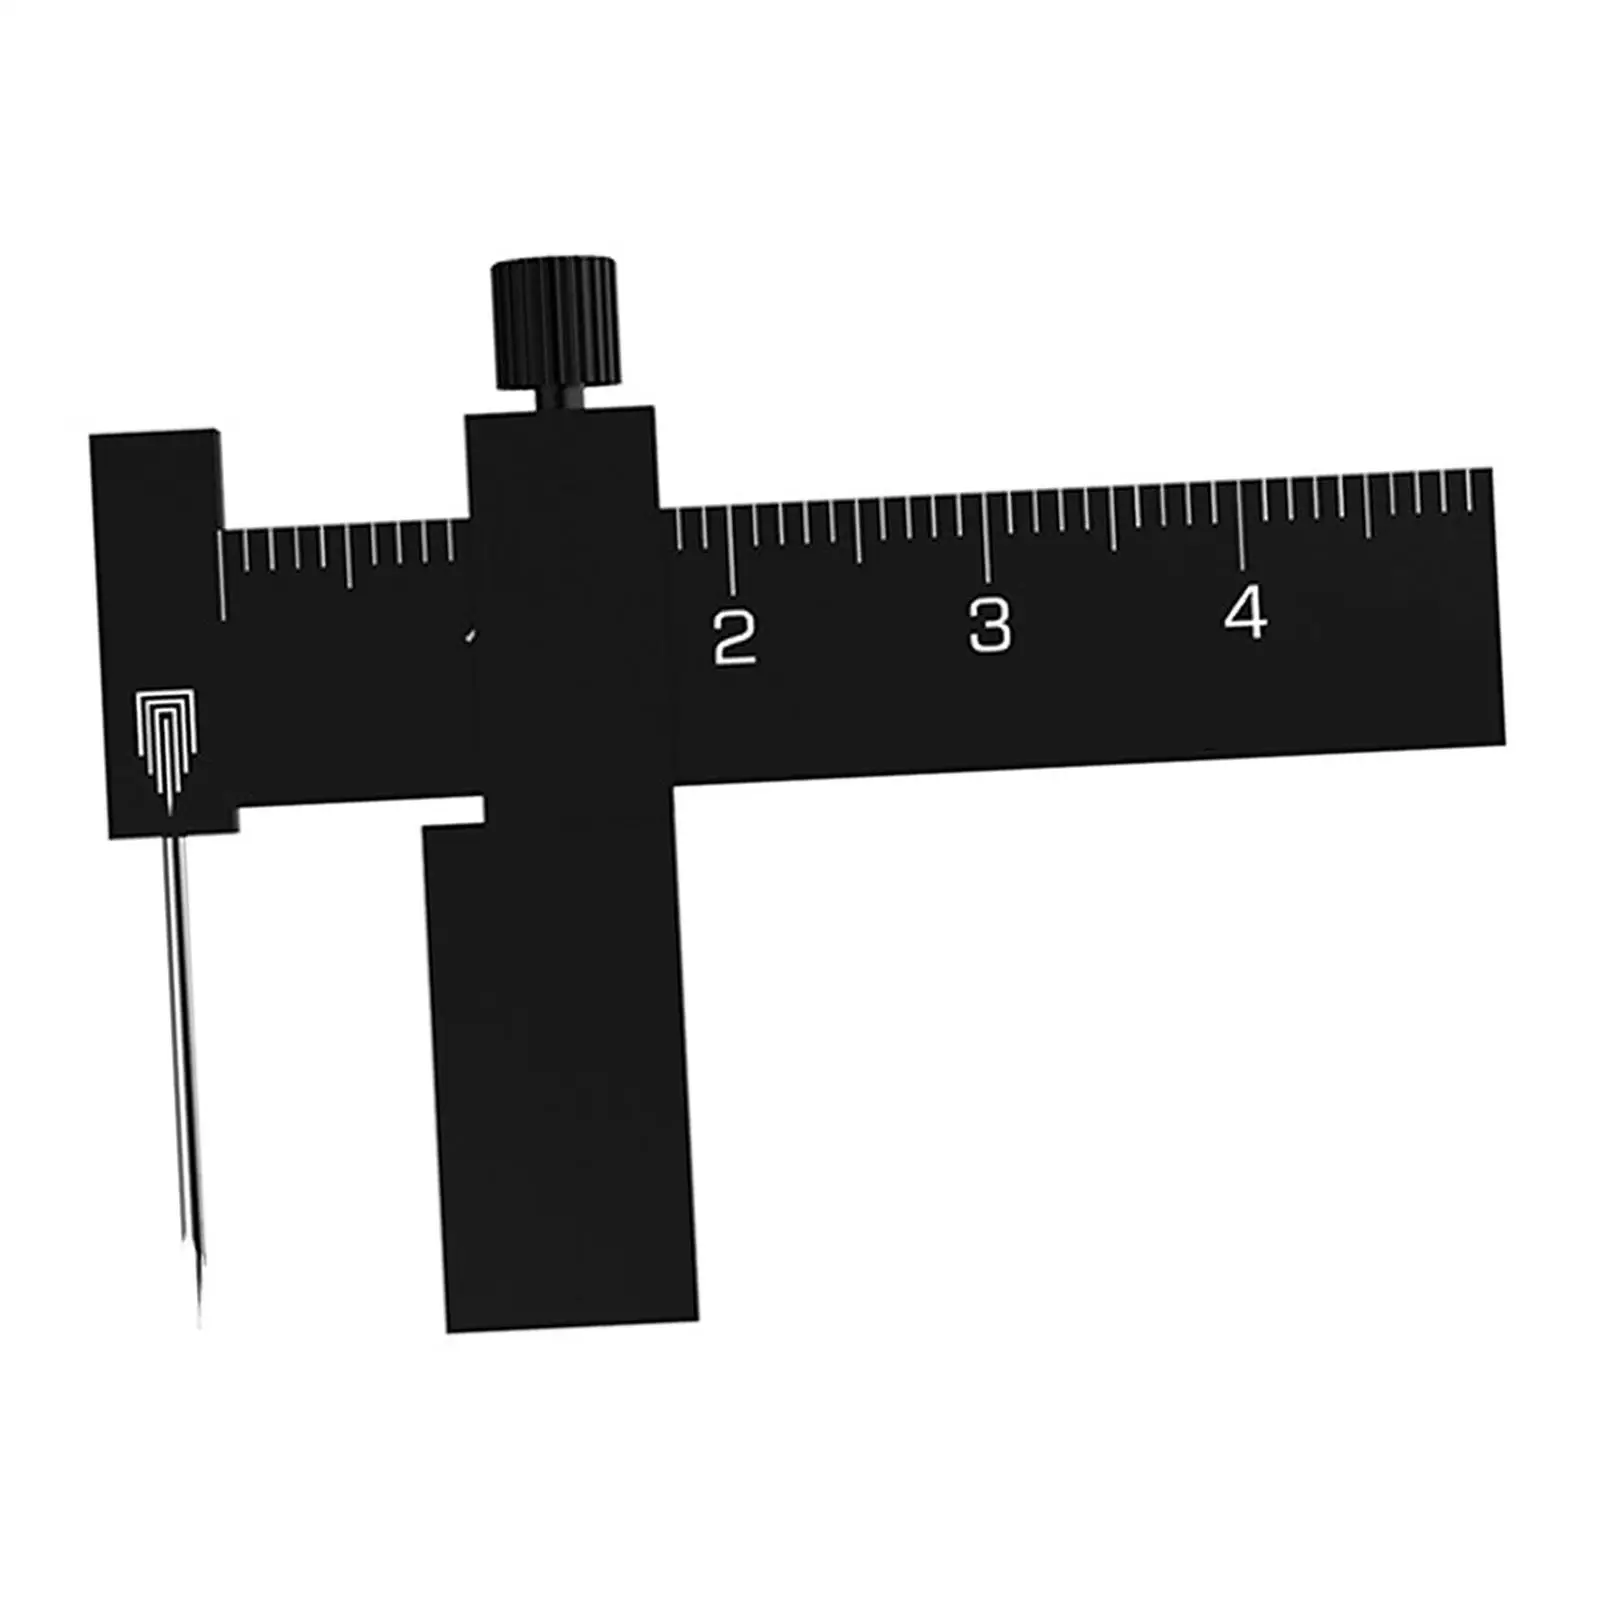 Equidistant Parallel Scriber Engraving Ruler T14A02 T14A03 DIY for Scale Model Modeler Craft Tool Drafting Crafting Woodworking